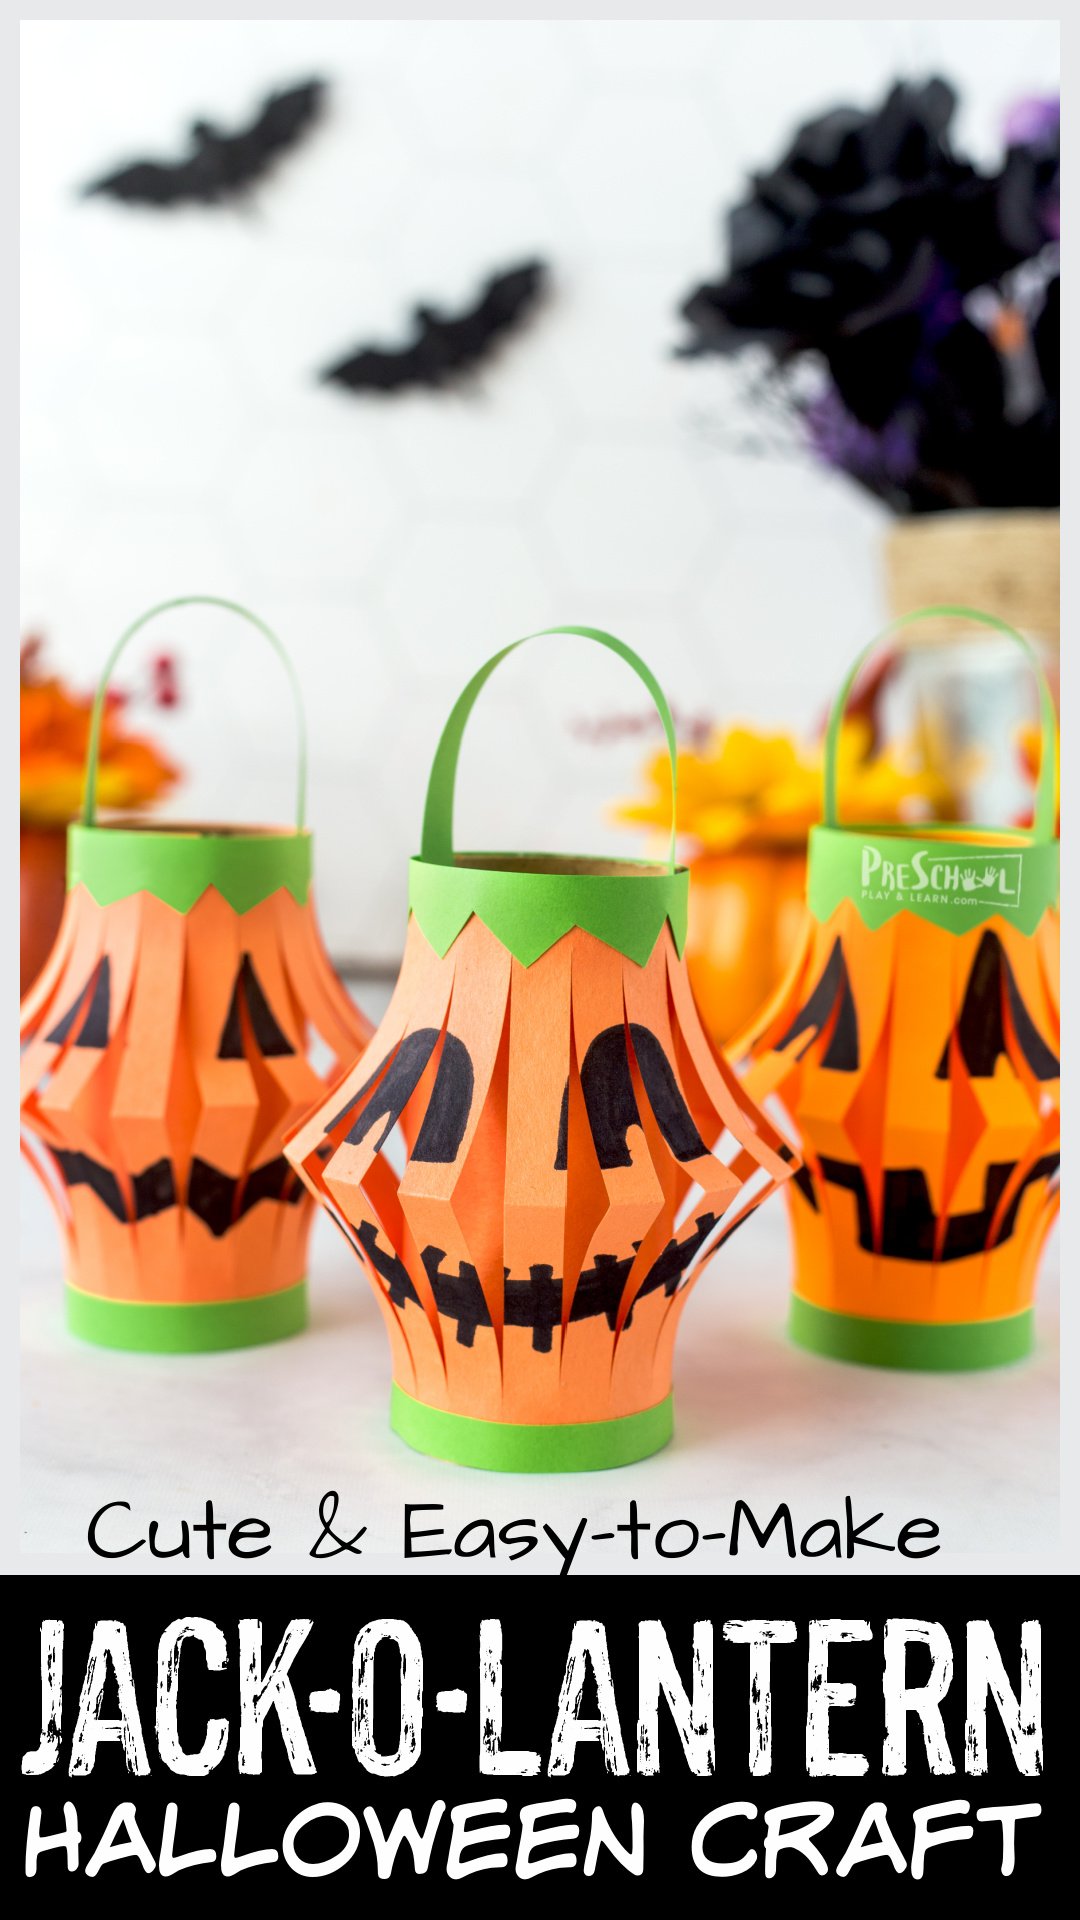 Paper Punch-Out Lanterns: Easy Paper Lanterns Kids Can Make